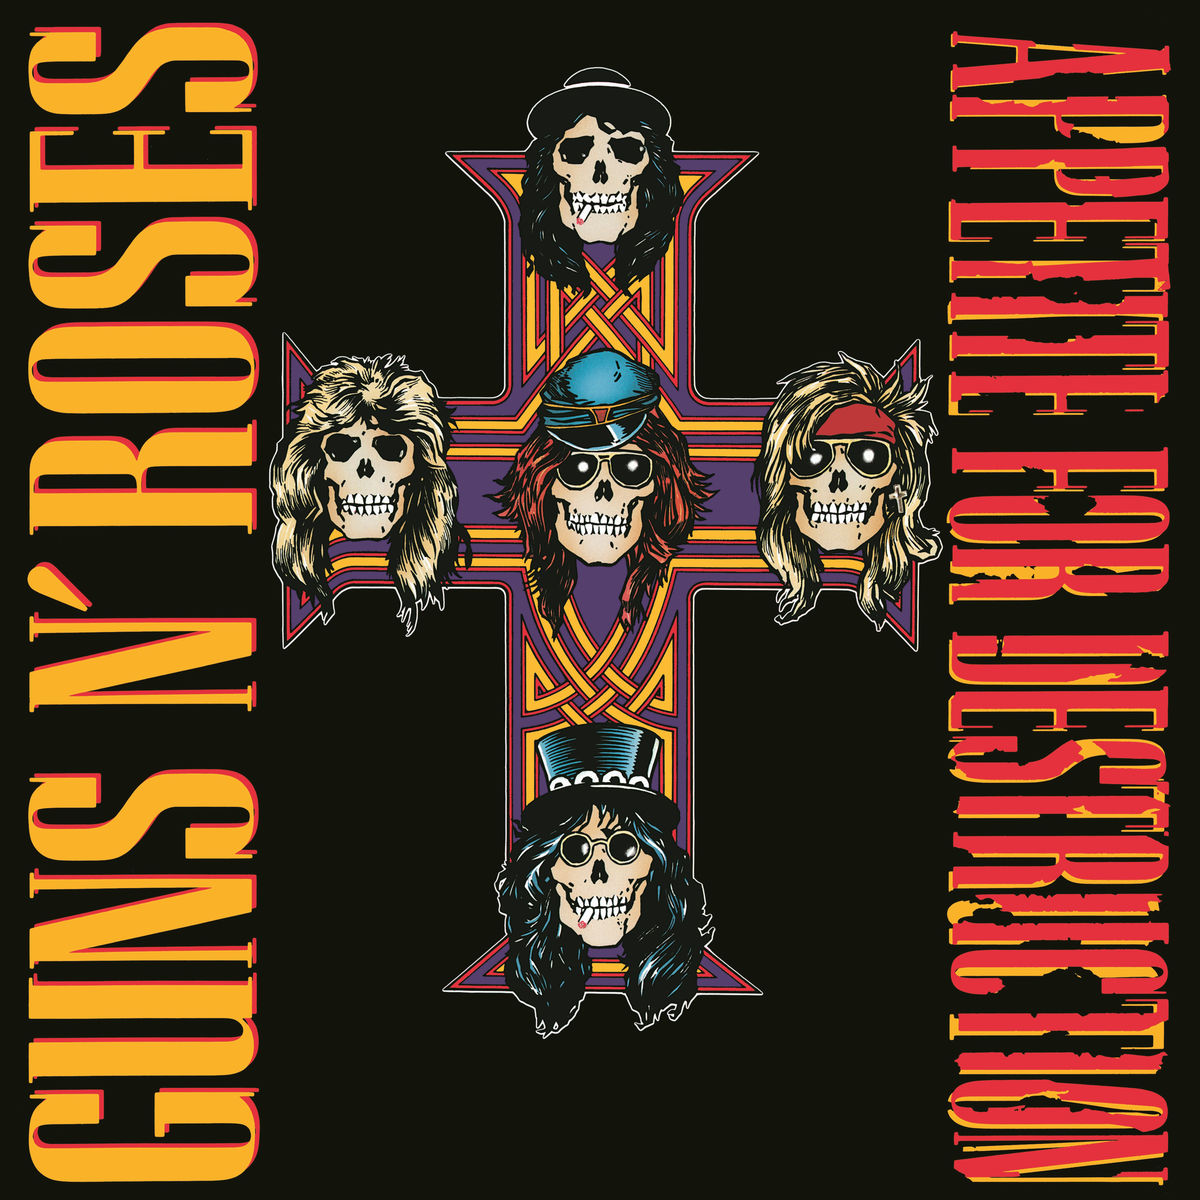 Guns N' Roses Outtakes: The Road To 'Appetite For Destruction